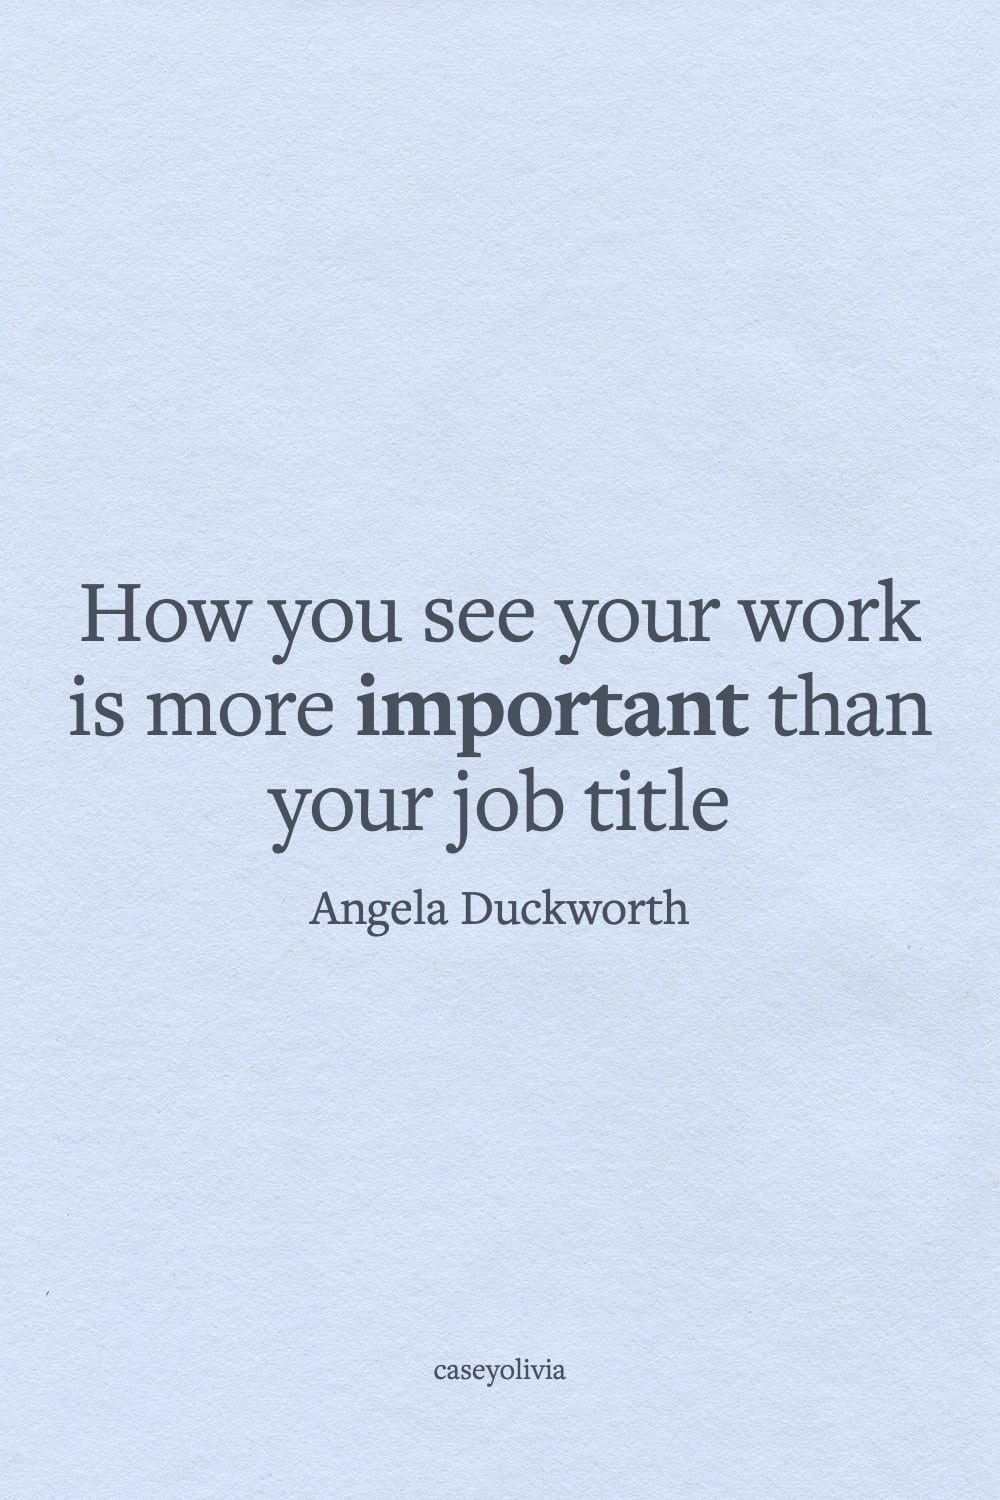 angela duckworth how you see your work caption